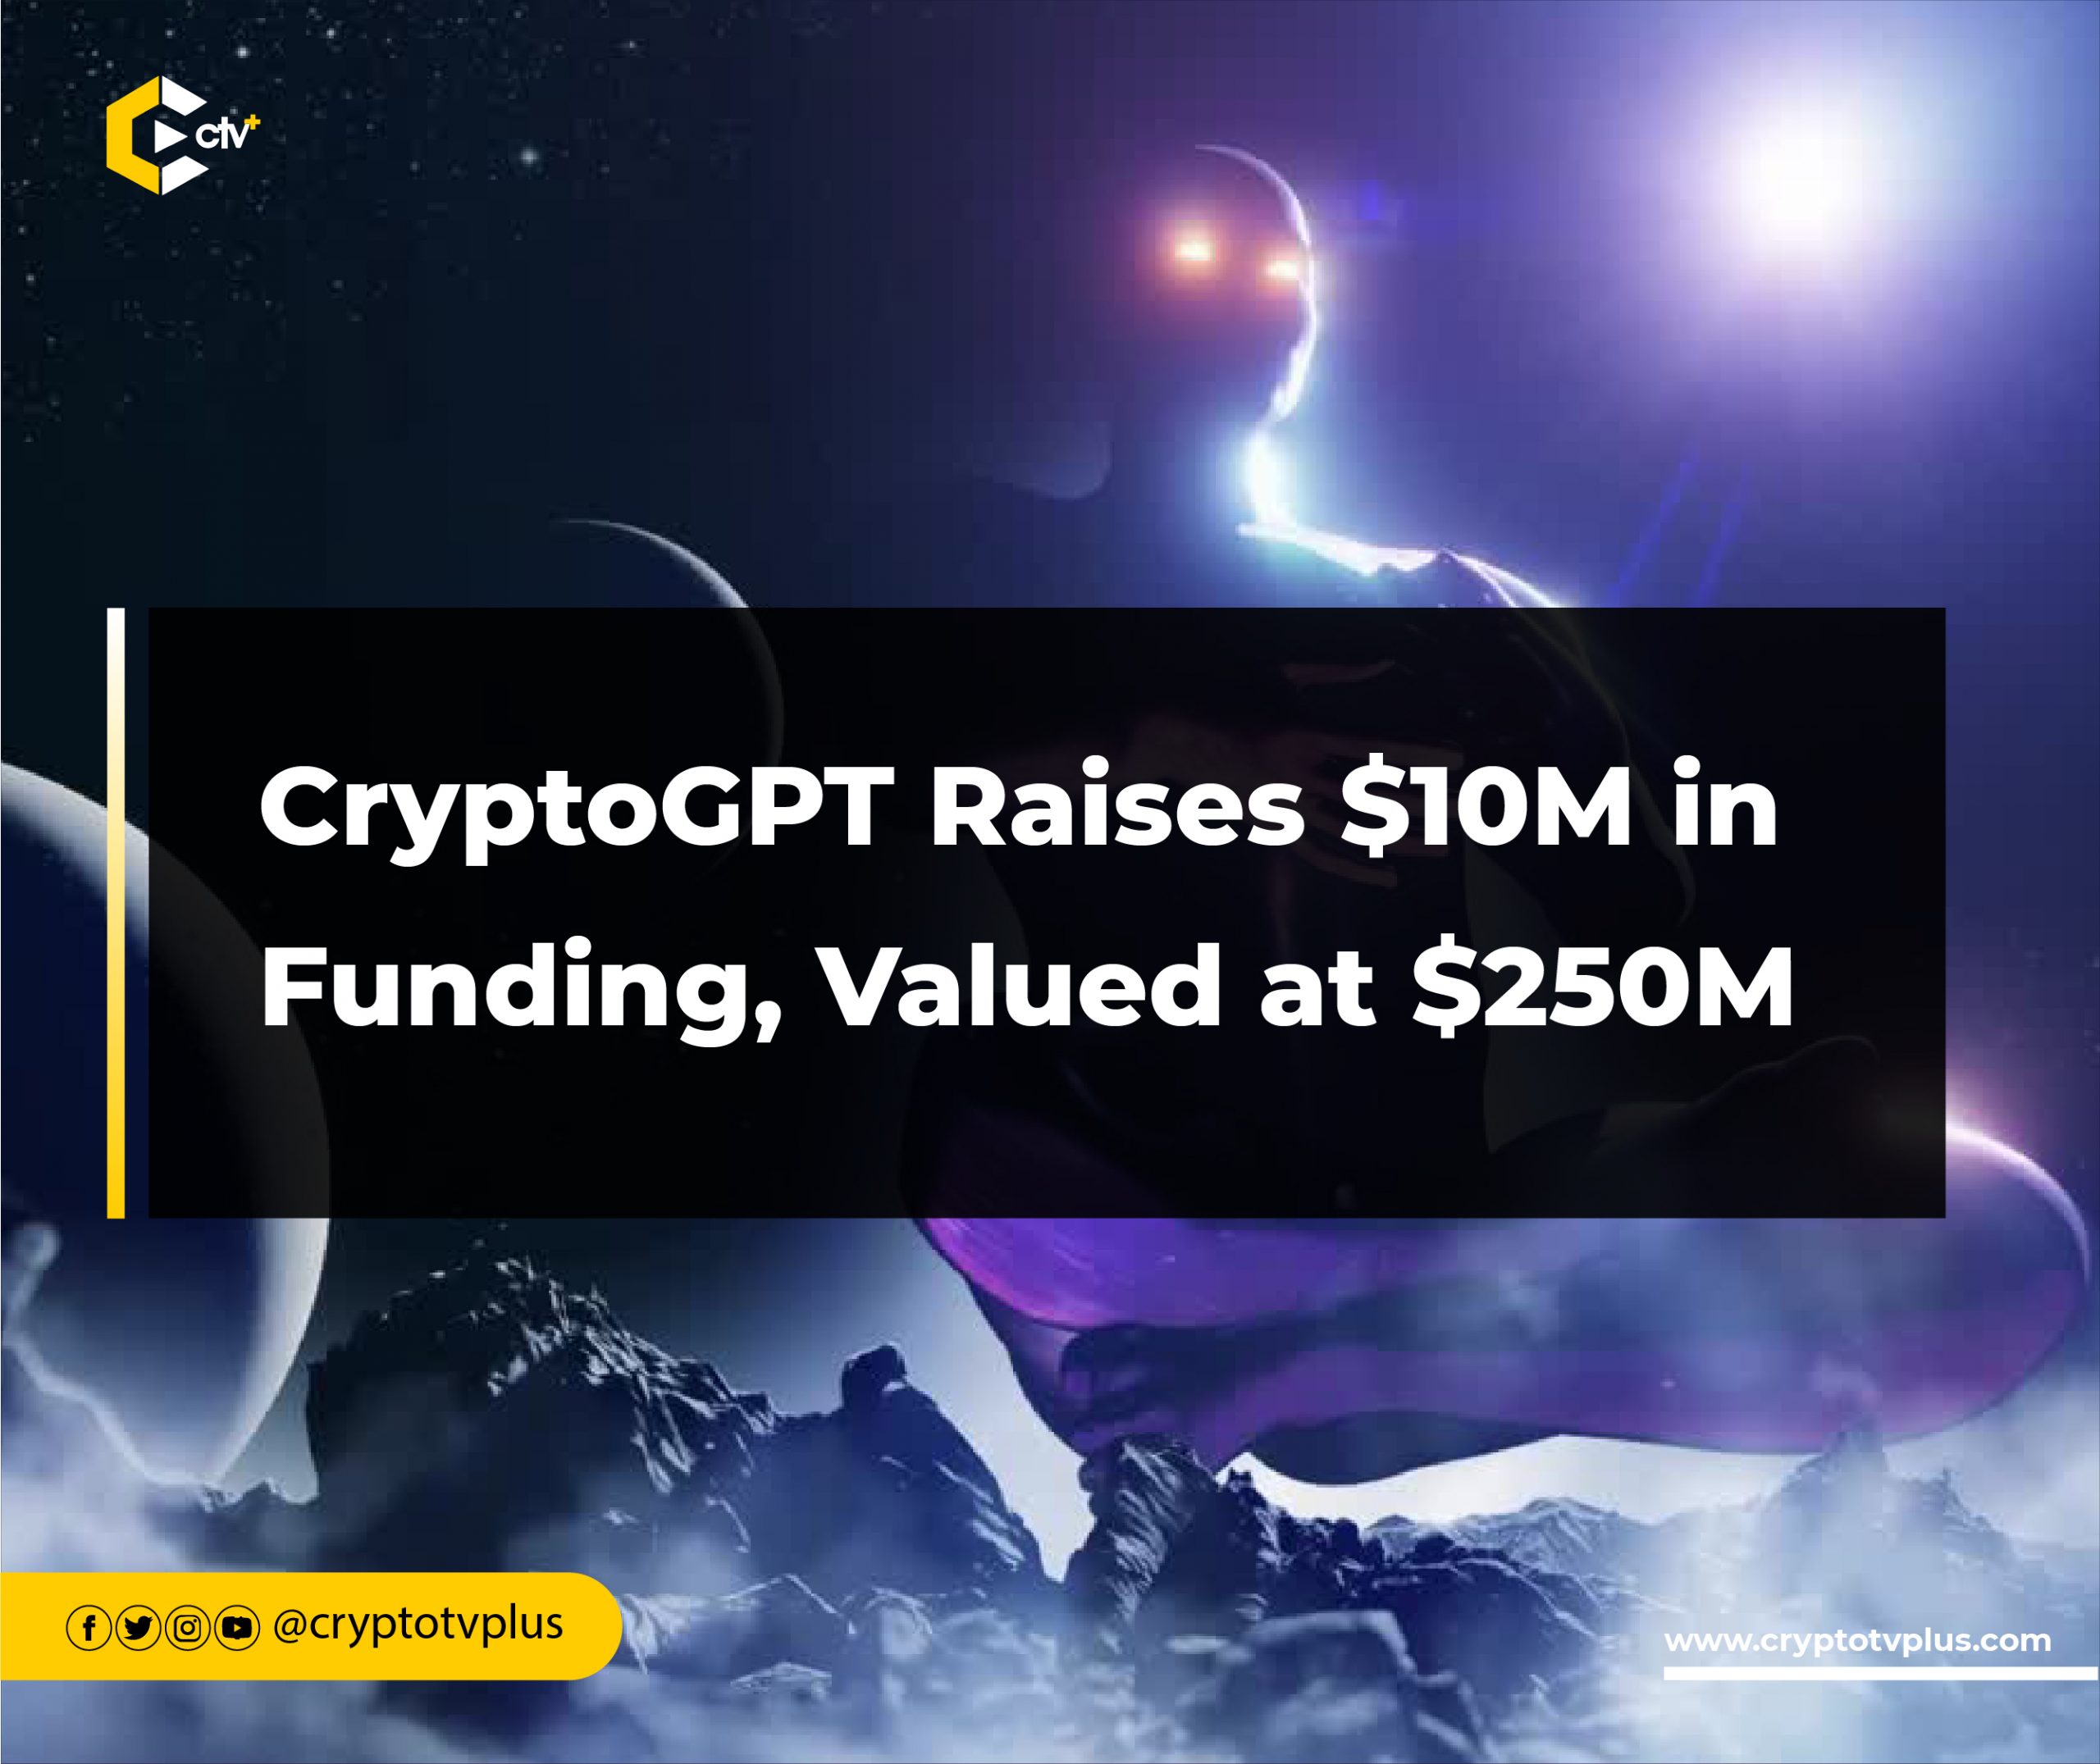 CryptoGPT Raises $10M in Funding, Valued at $250M